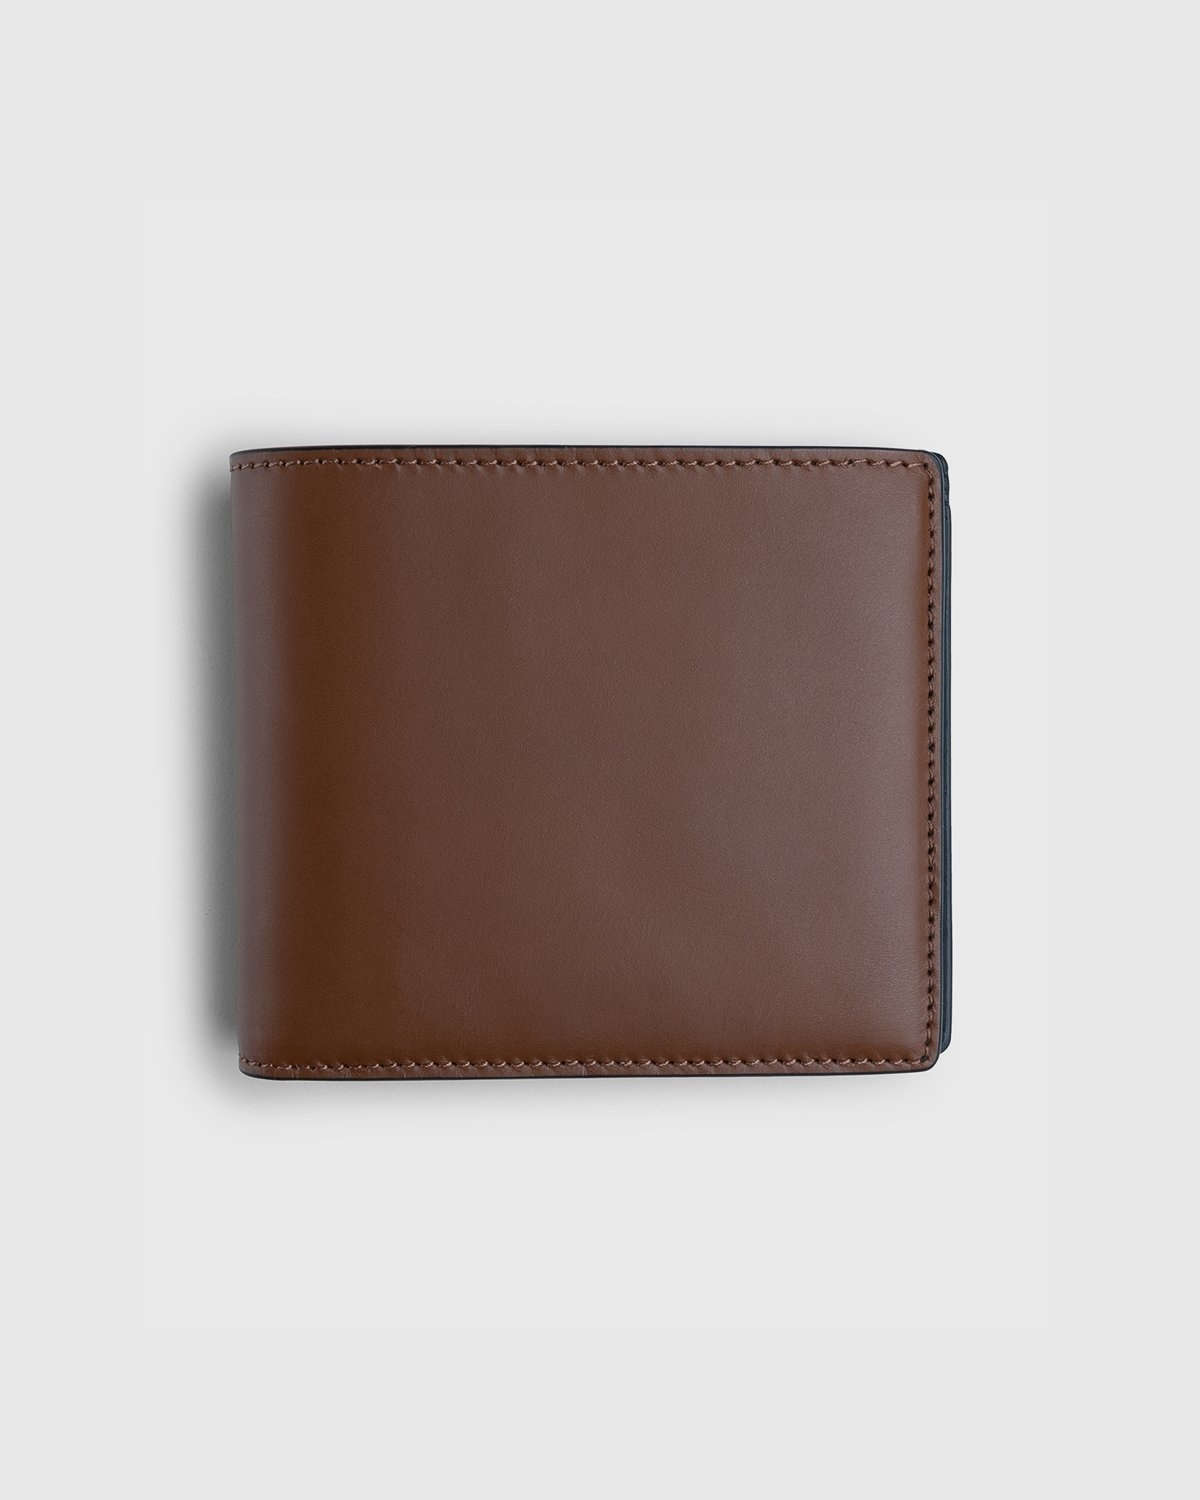 Maison Margiela – Leather Wallet Brown - Wallets - Brown - Image 2